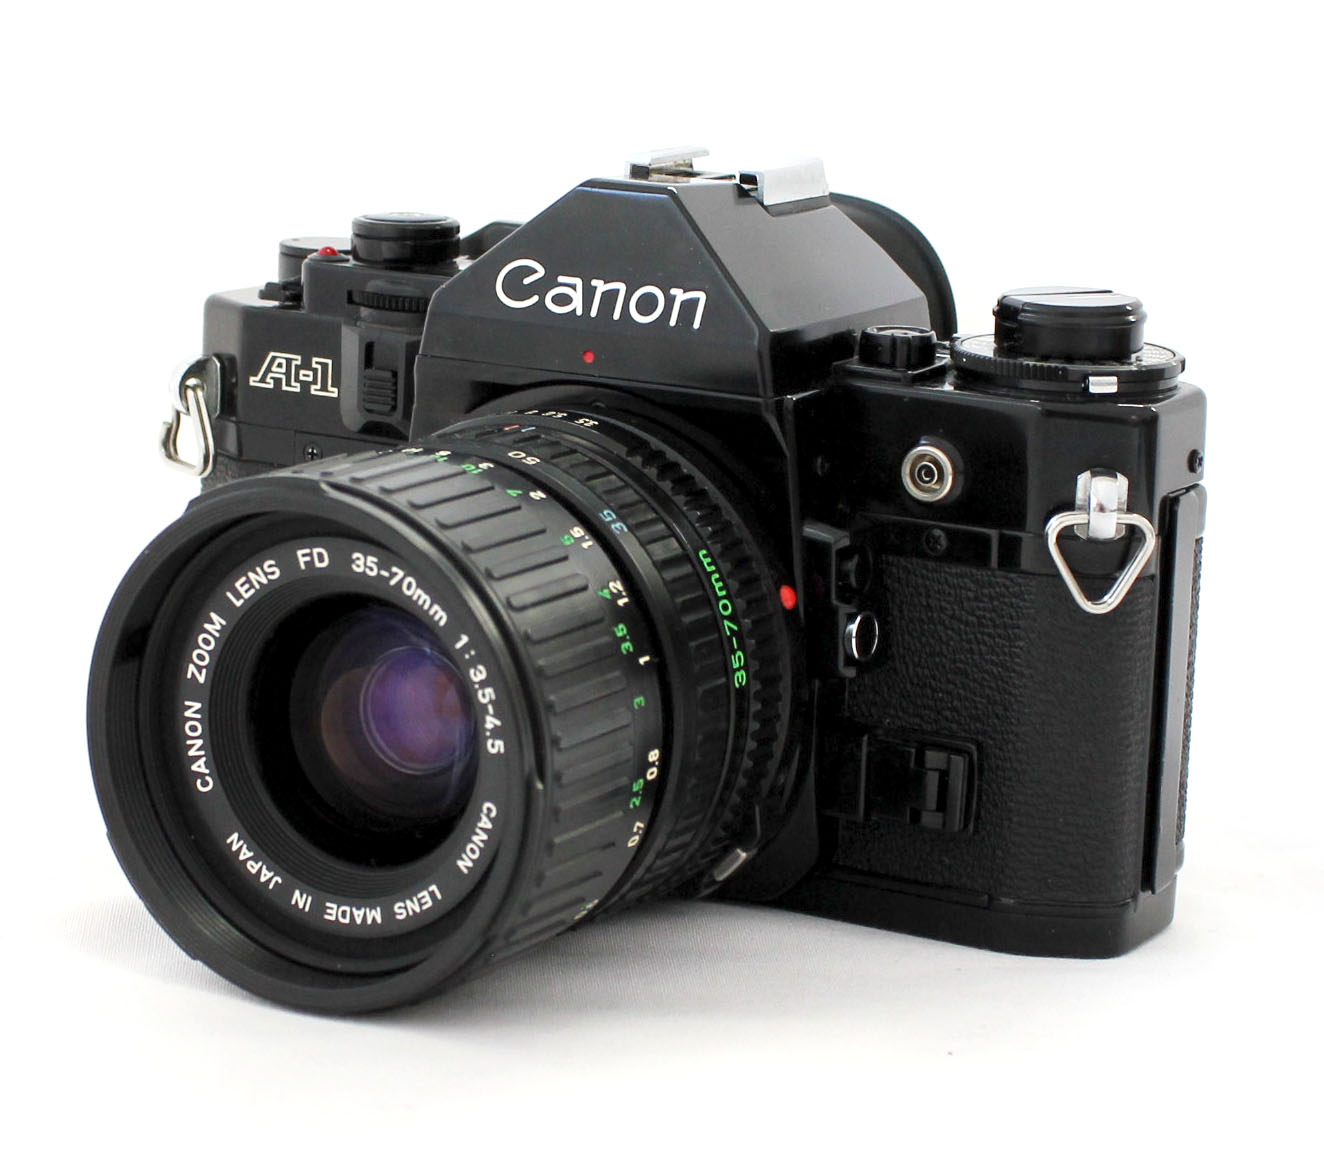 Japan Used Camera Shop | Canon A-1 35mm SLR Film Camera with New FD NFD 35-70mm F/3.5-4.5 Lens from Japan